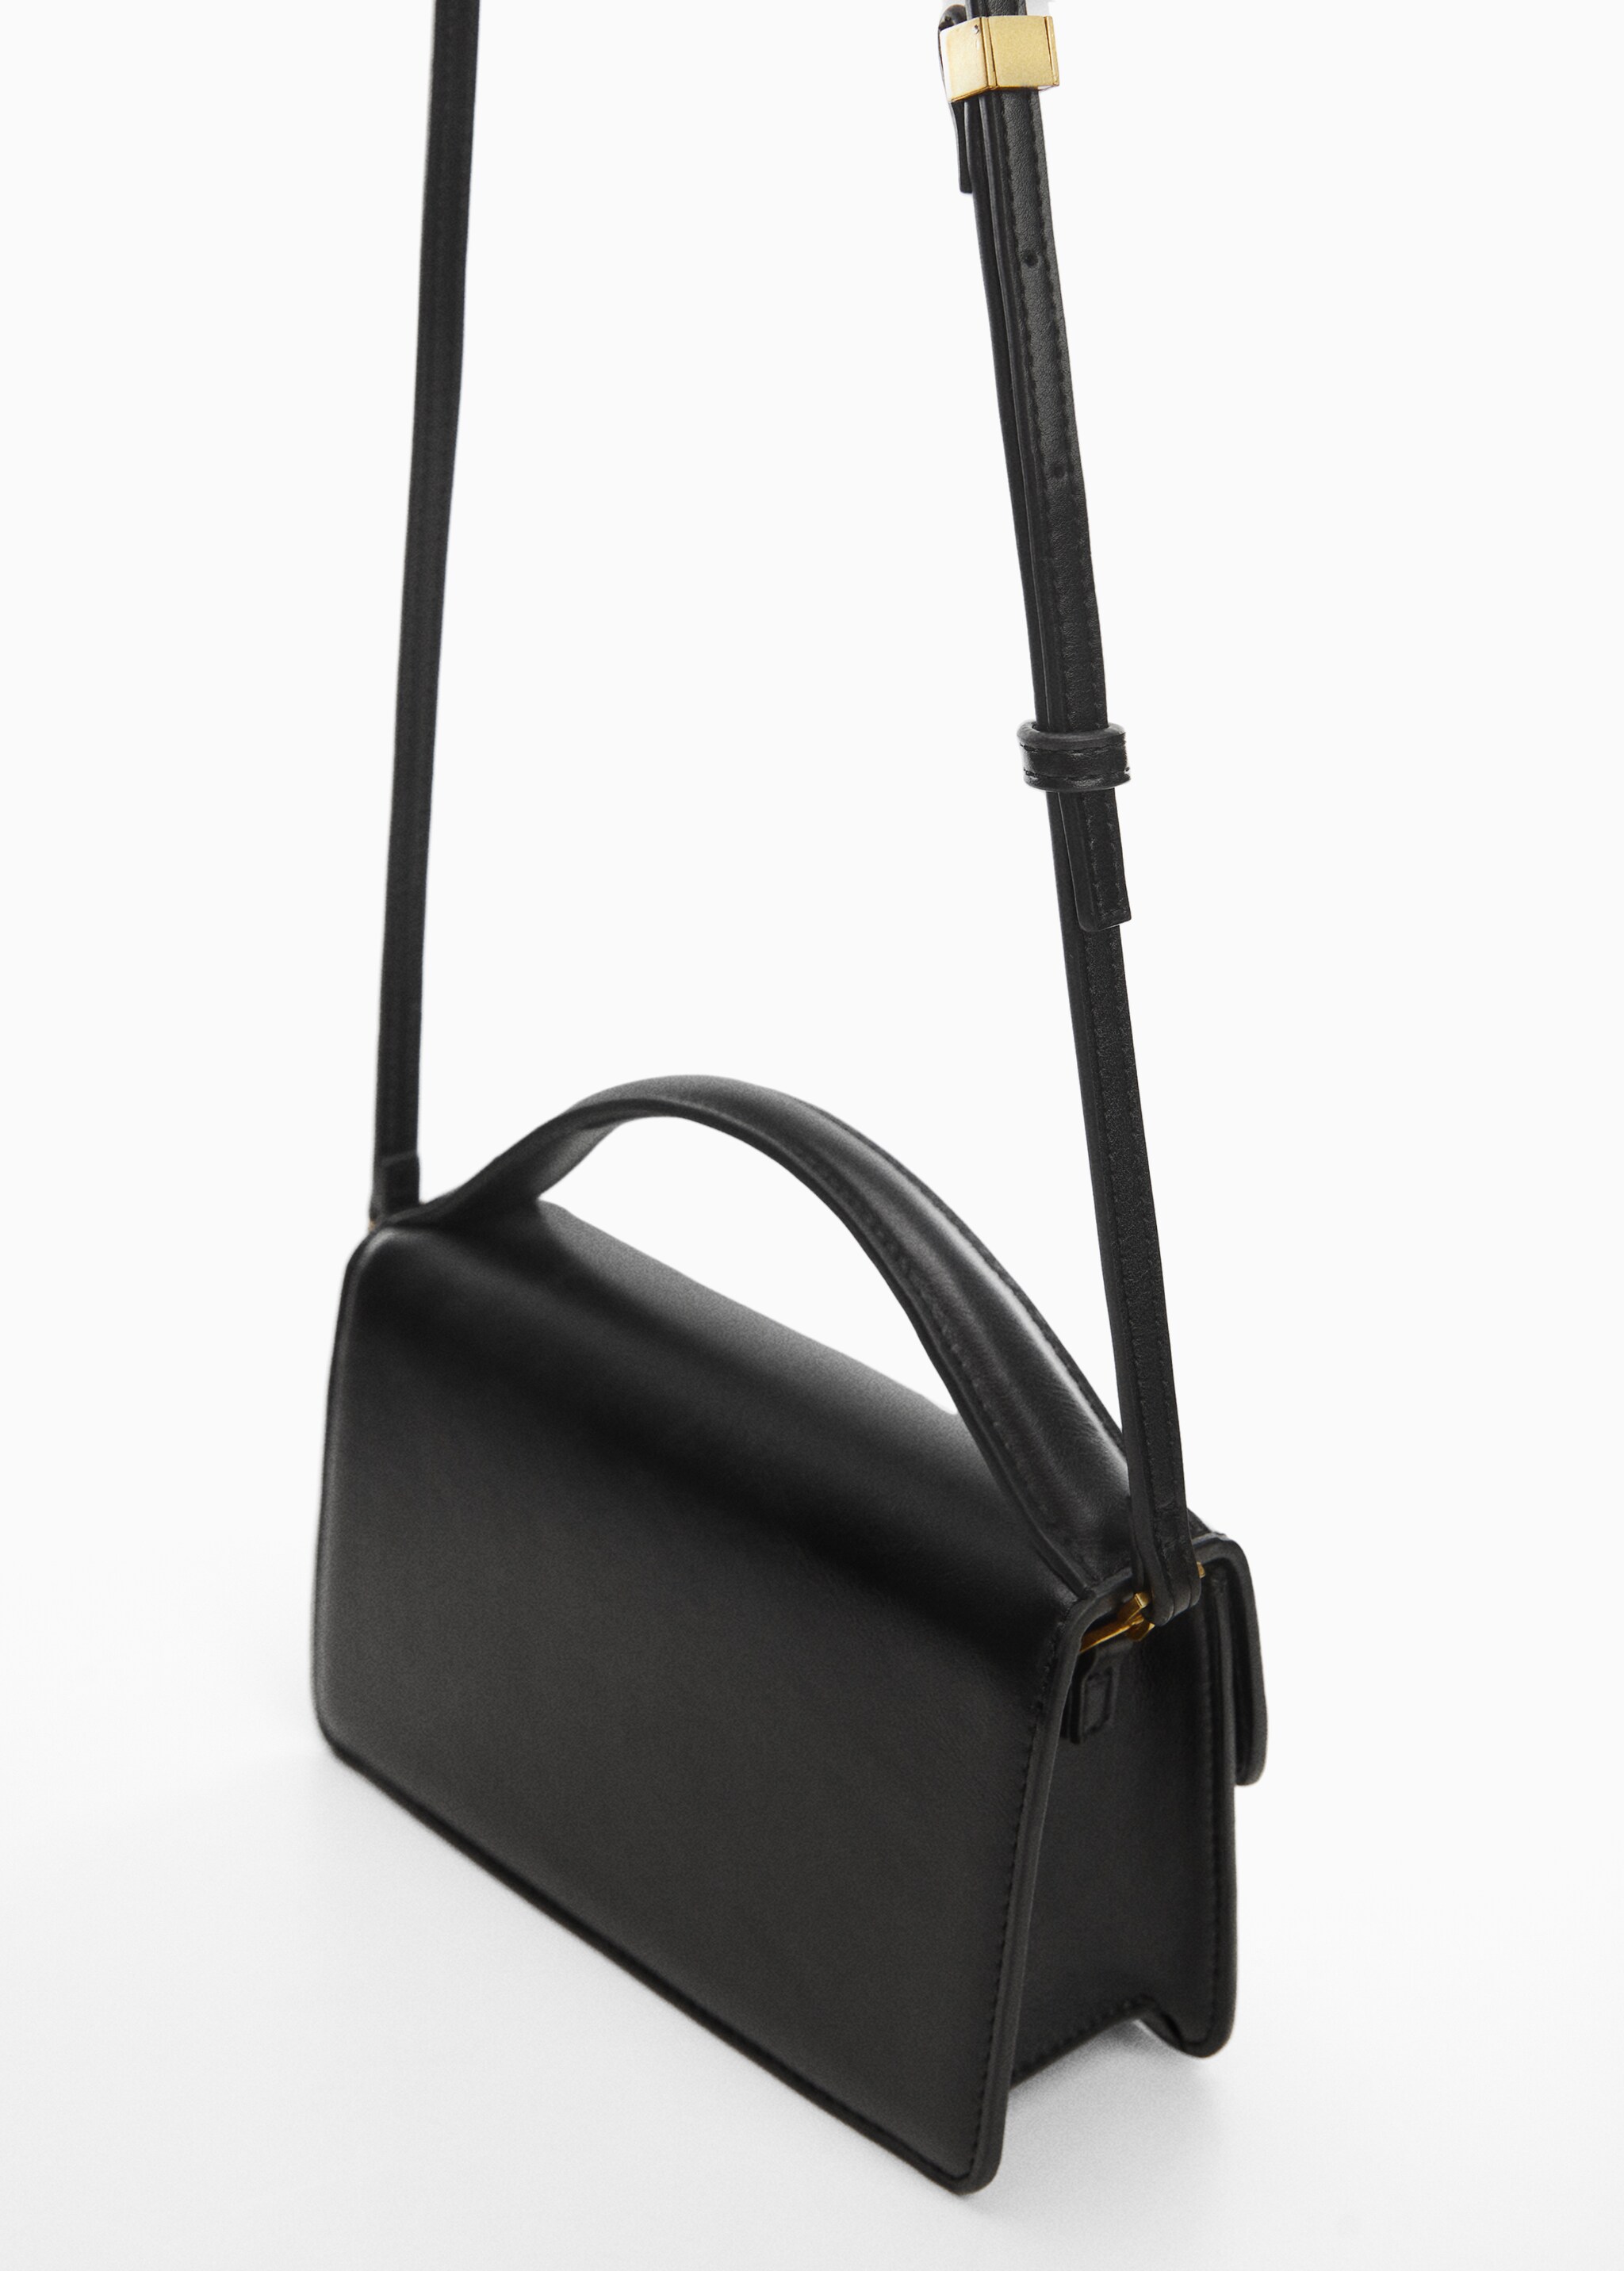 Rectangular bag with flap - Details of the article 1